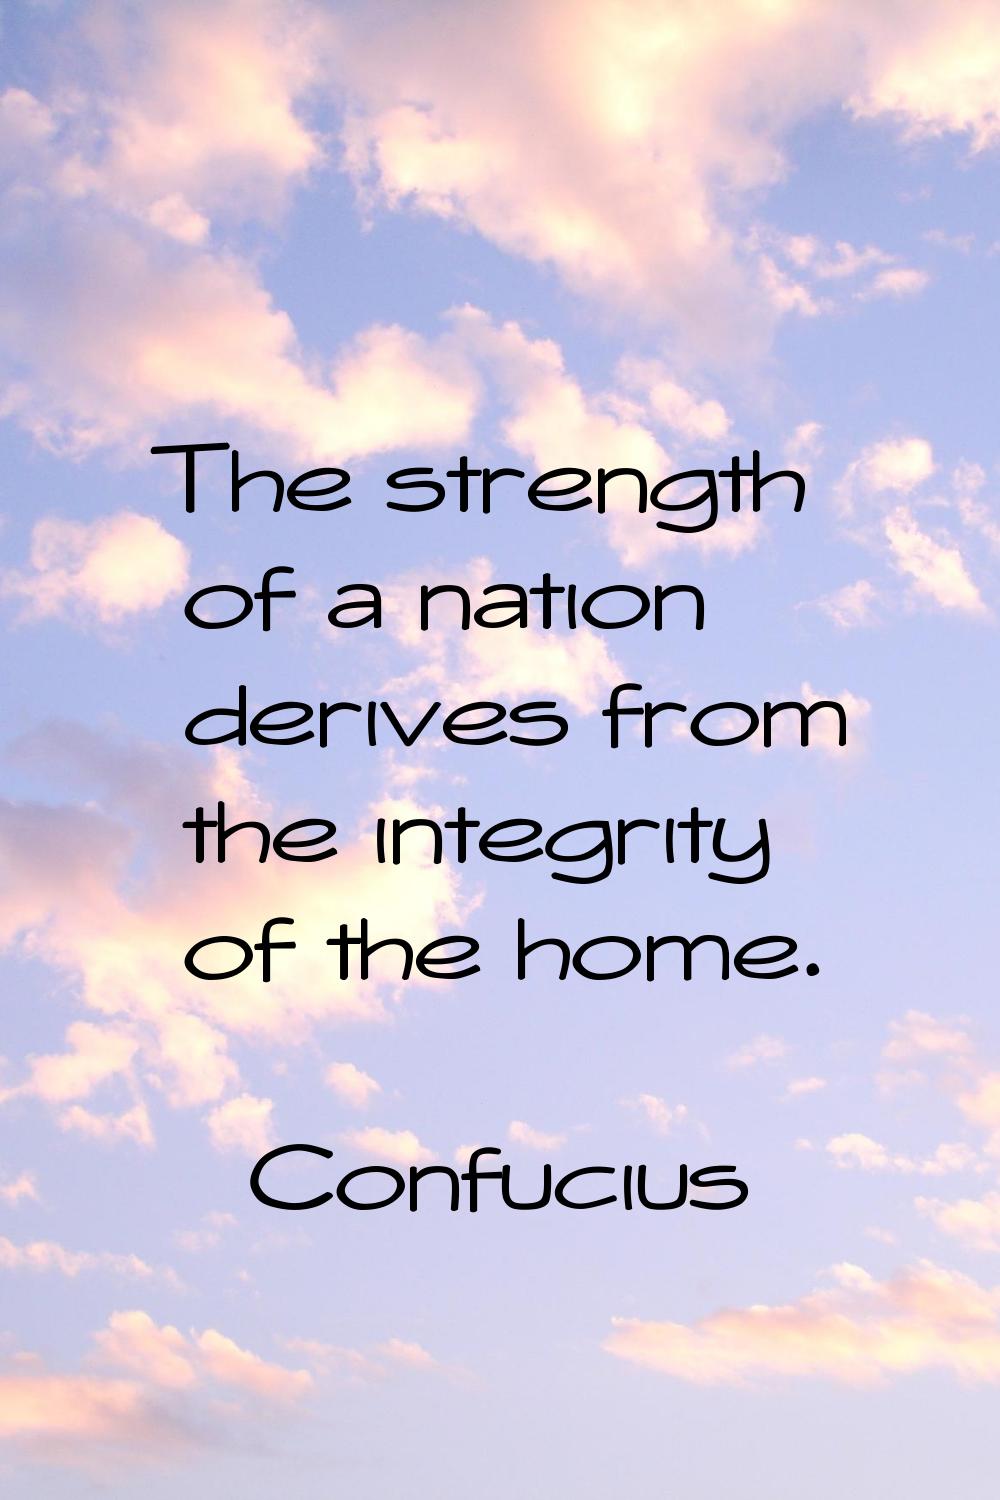 The strength of a nation derives from the integrity of the home.